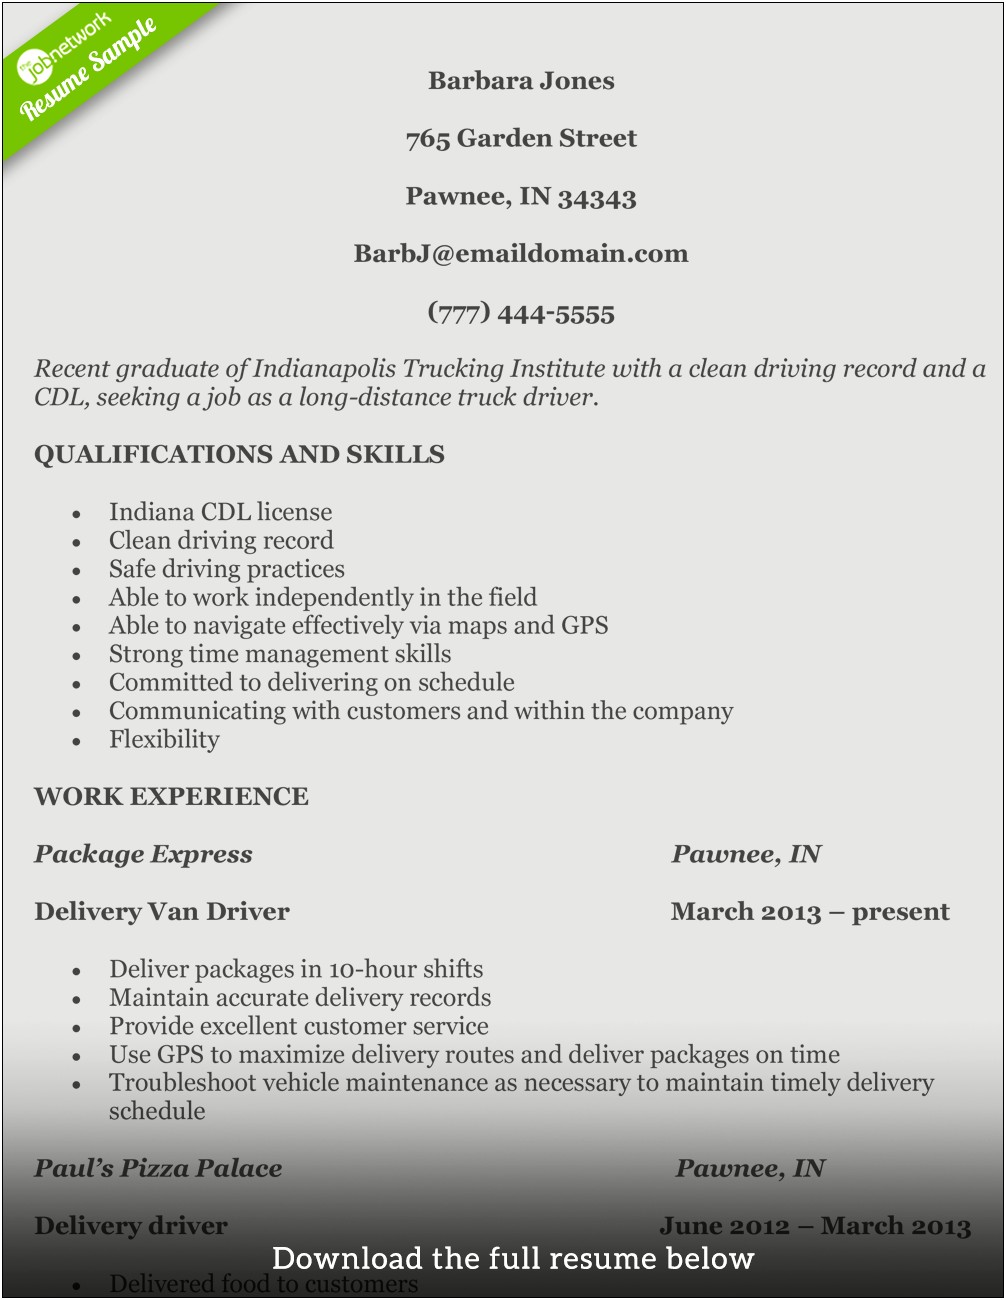 Objective Statement For Truck Driving Resume